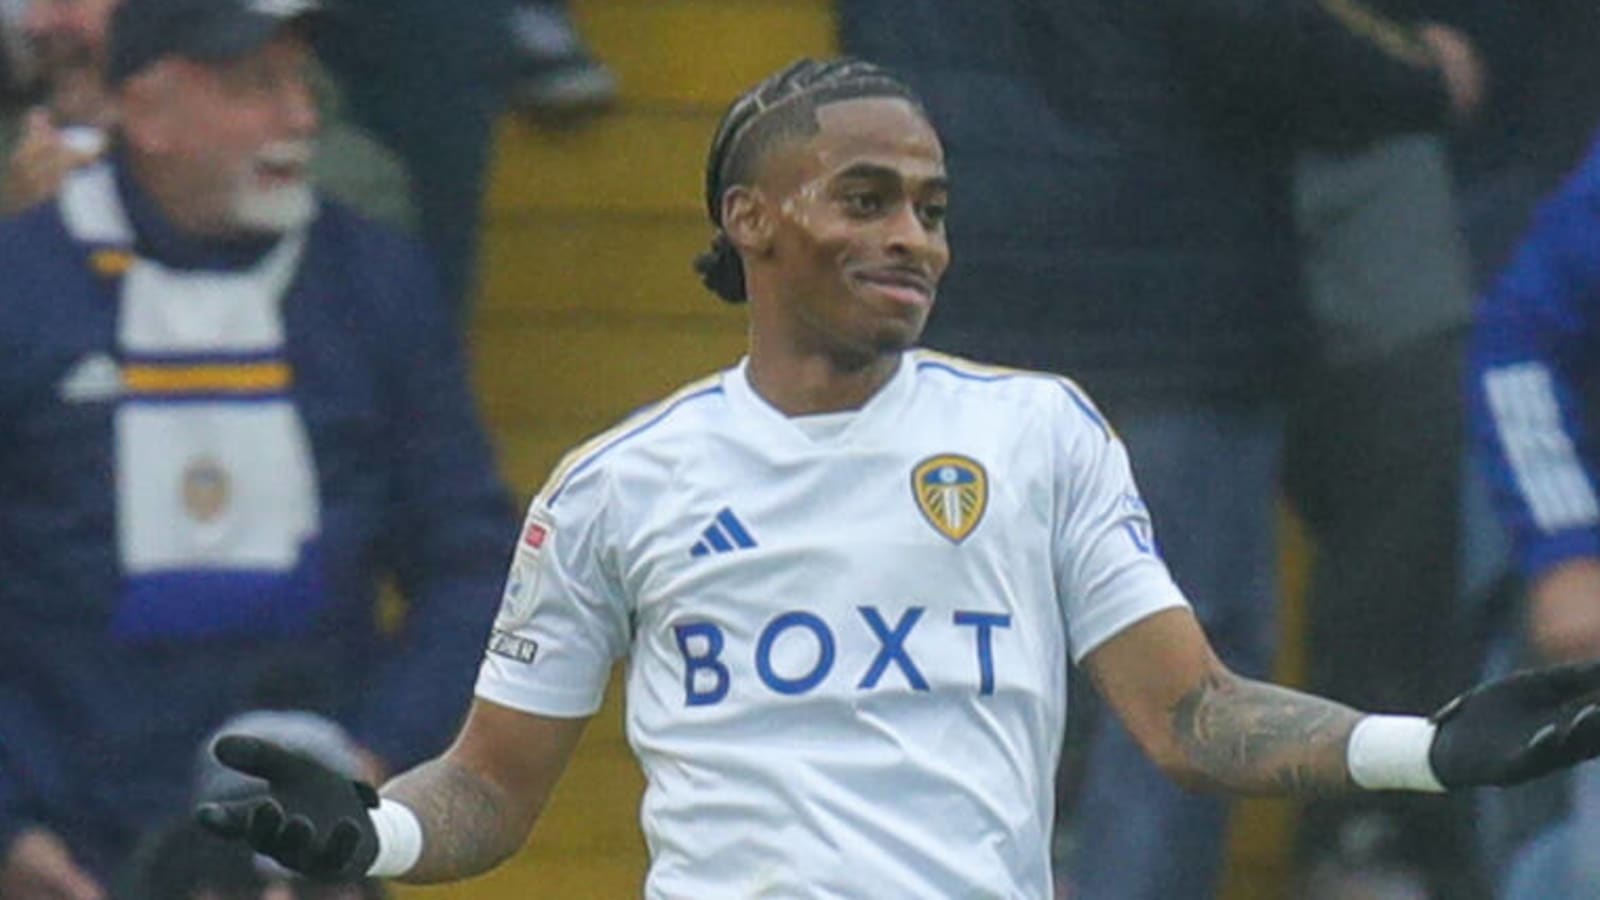  Leeds United star has several transfer suitors and his situation could change soon, says expert